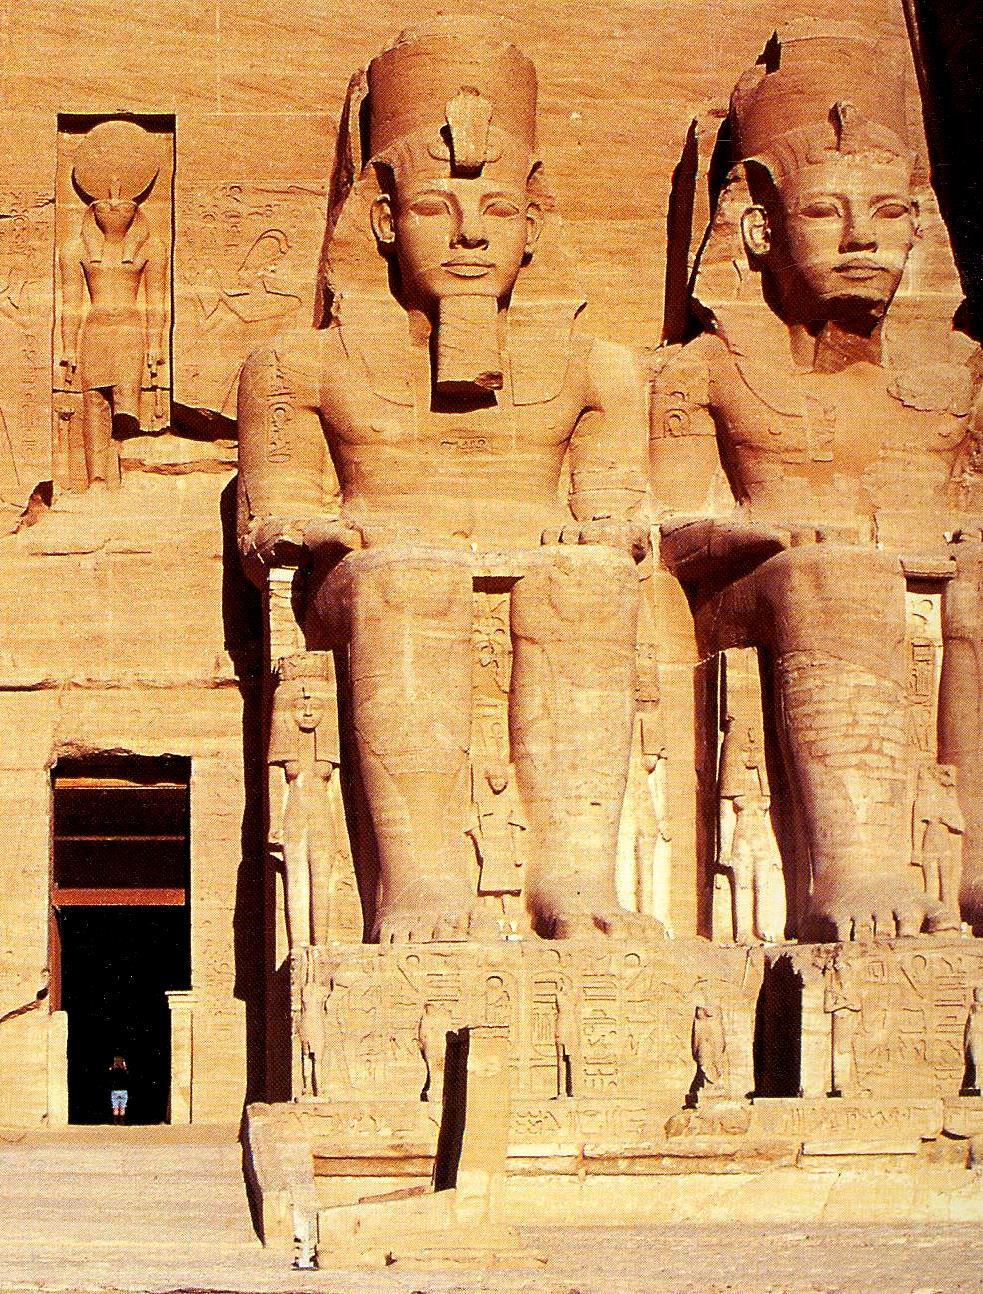 The entrance itself is crowned by a basrelief representing two images of